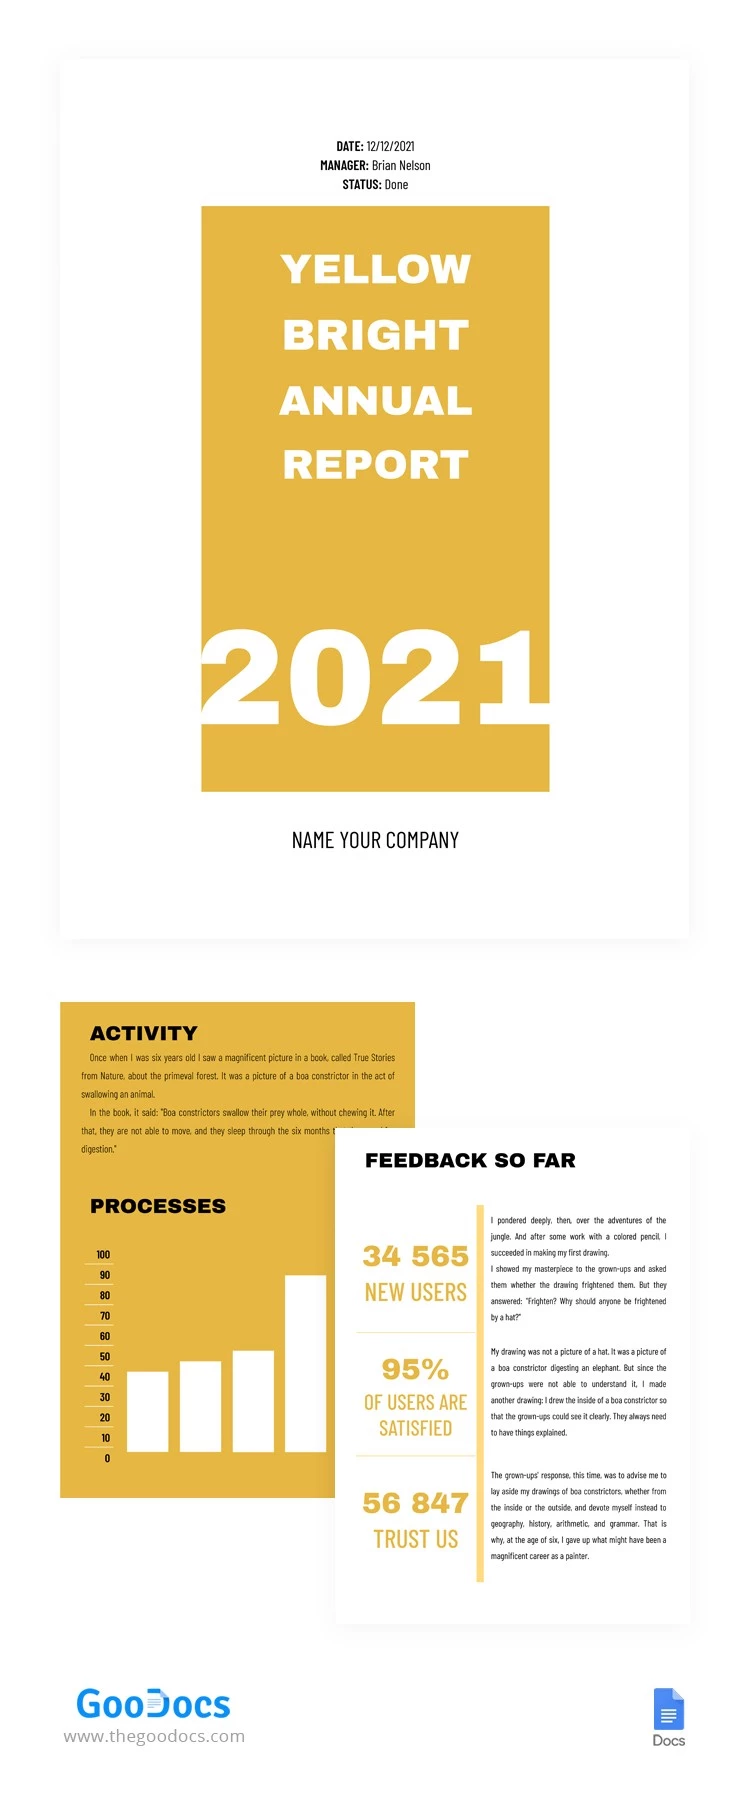 Yellow Bright Annual Report - free Google Docs Template - 10062270